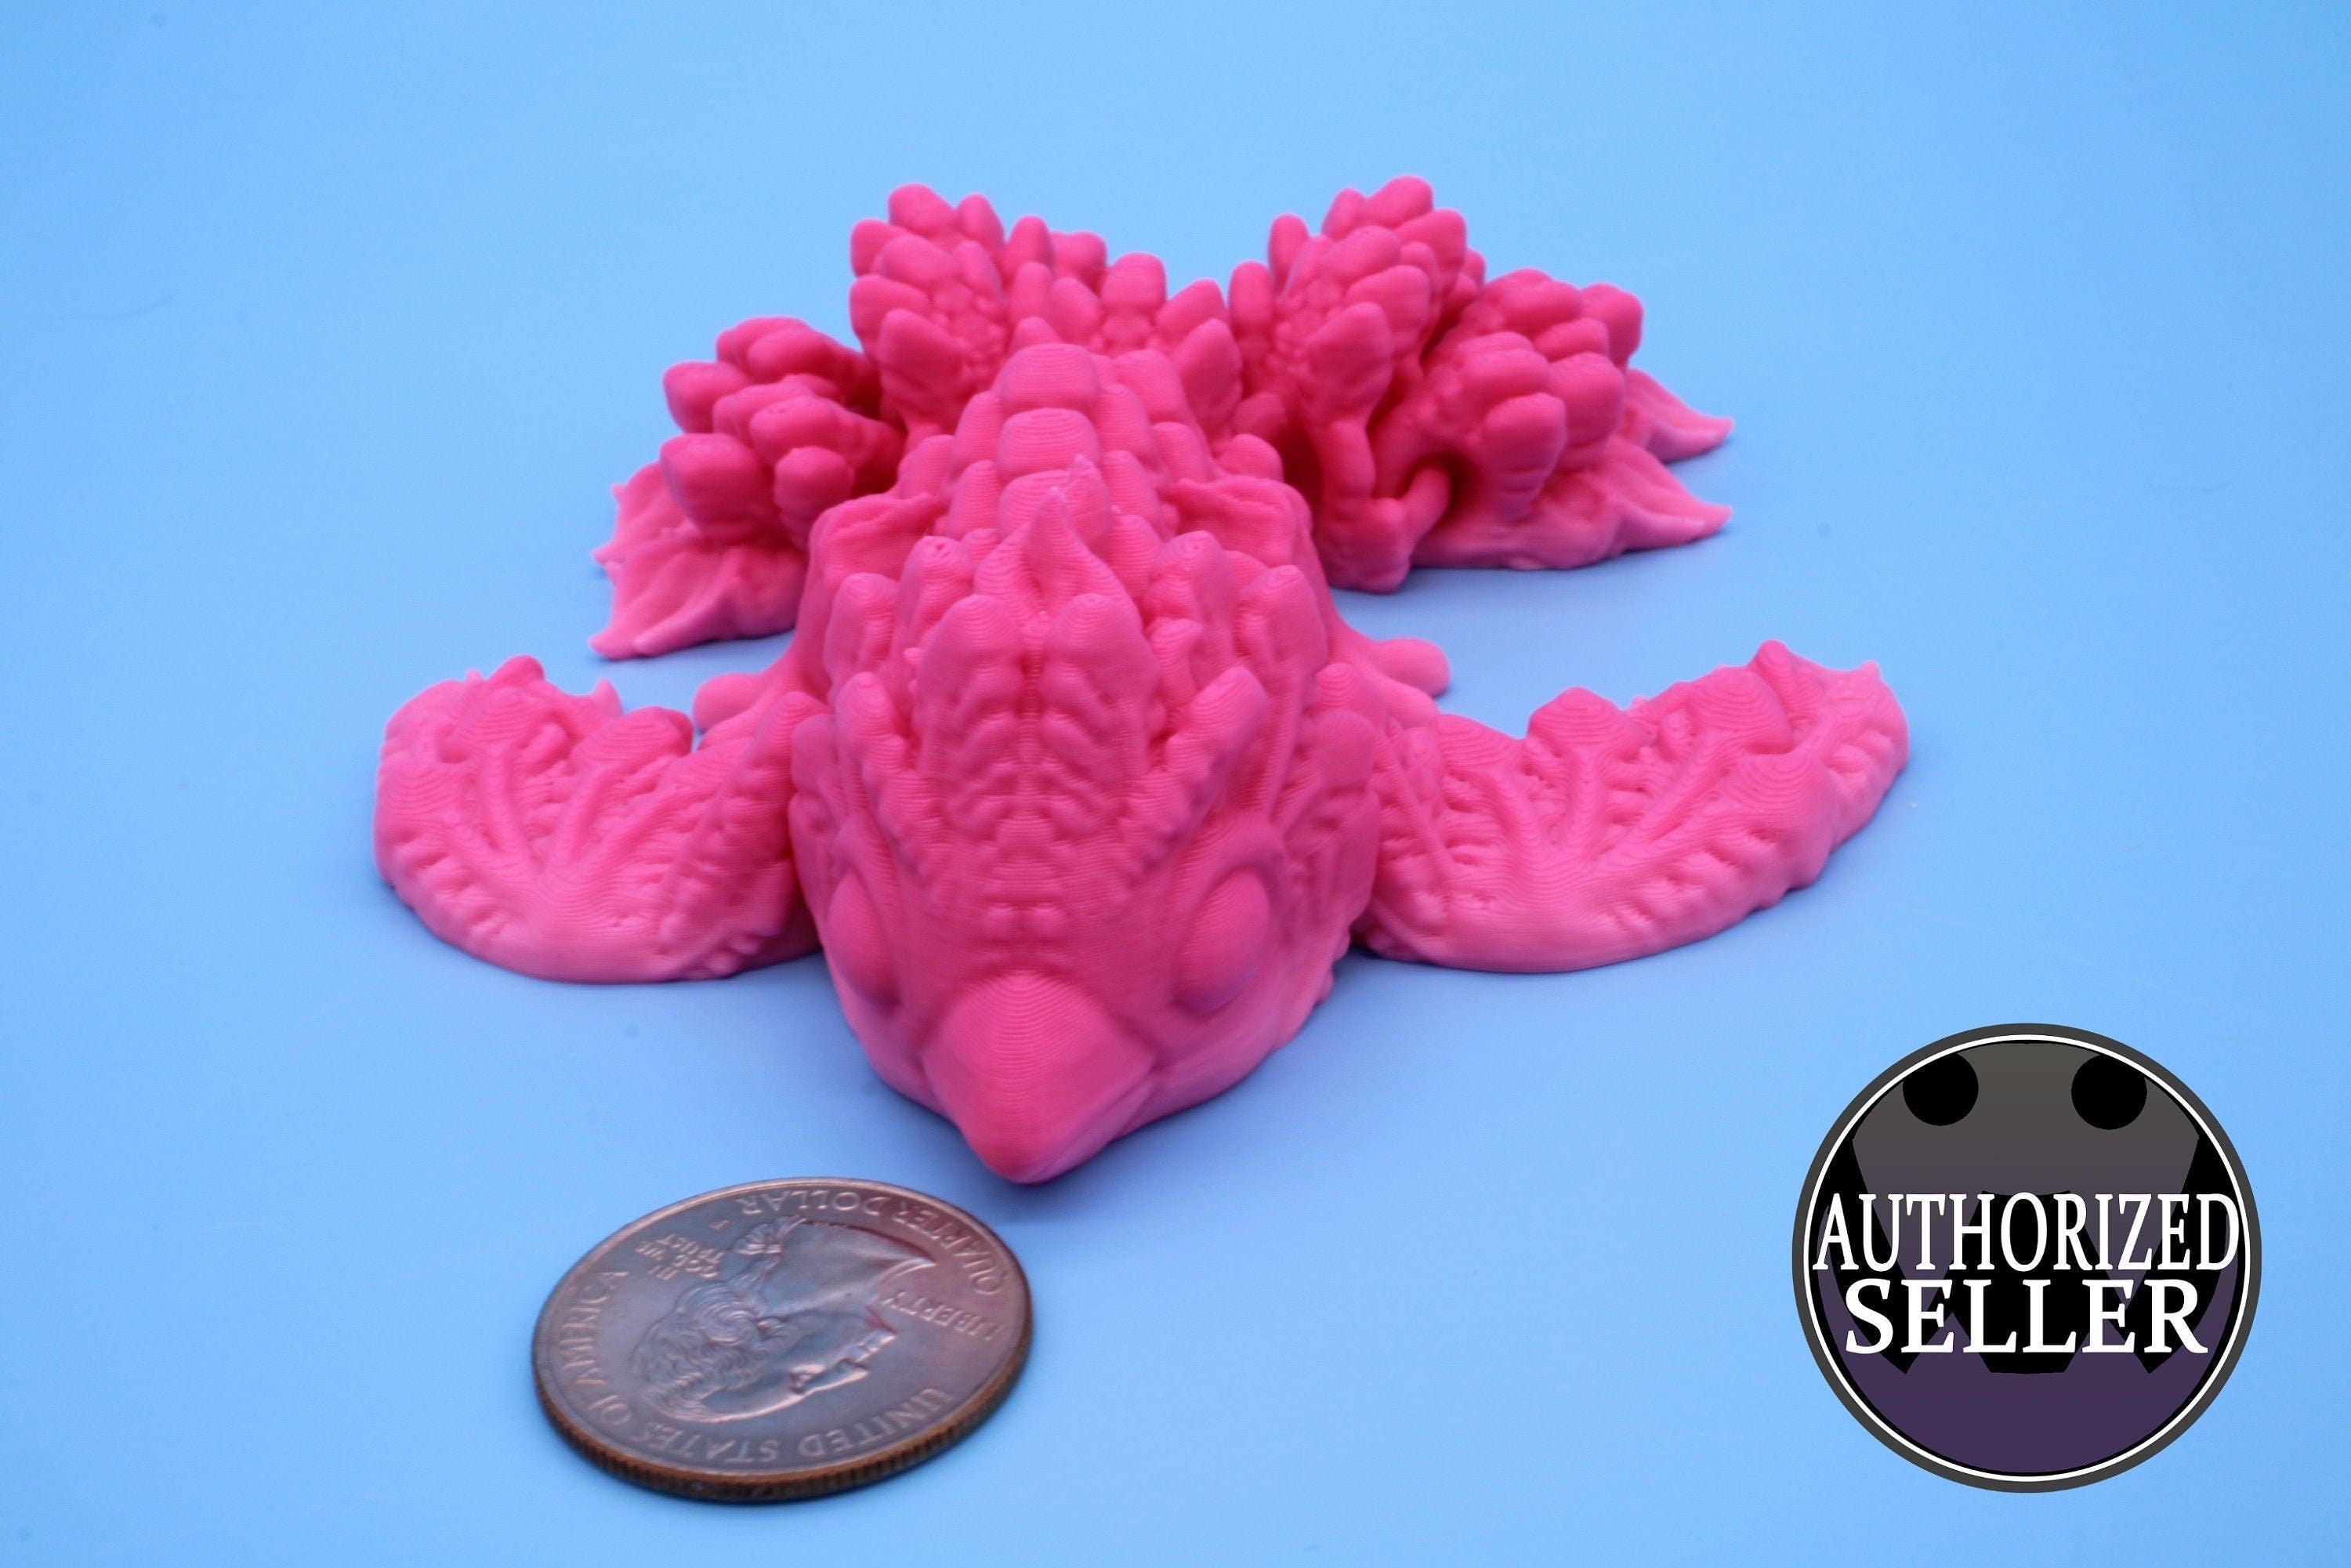 Pink Tiny Phoenix | 3D Printed Articulating Dragon | Flexi Toy | Adult Fidget Toy | Dragon Buddy ready for you! 5 inch.